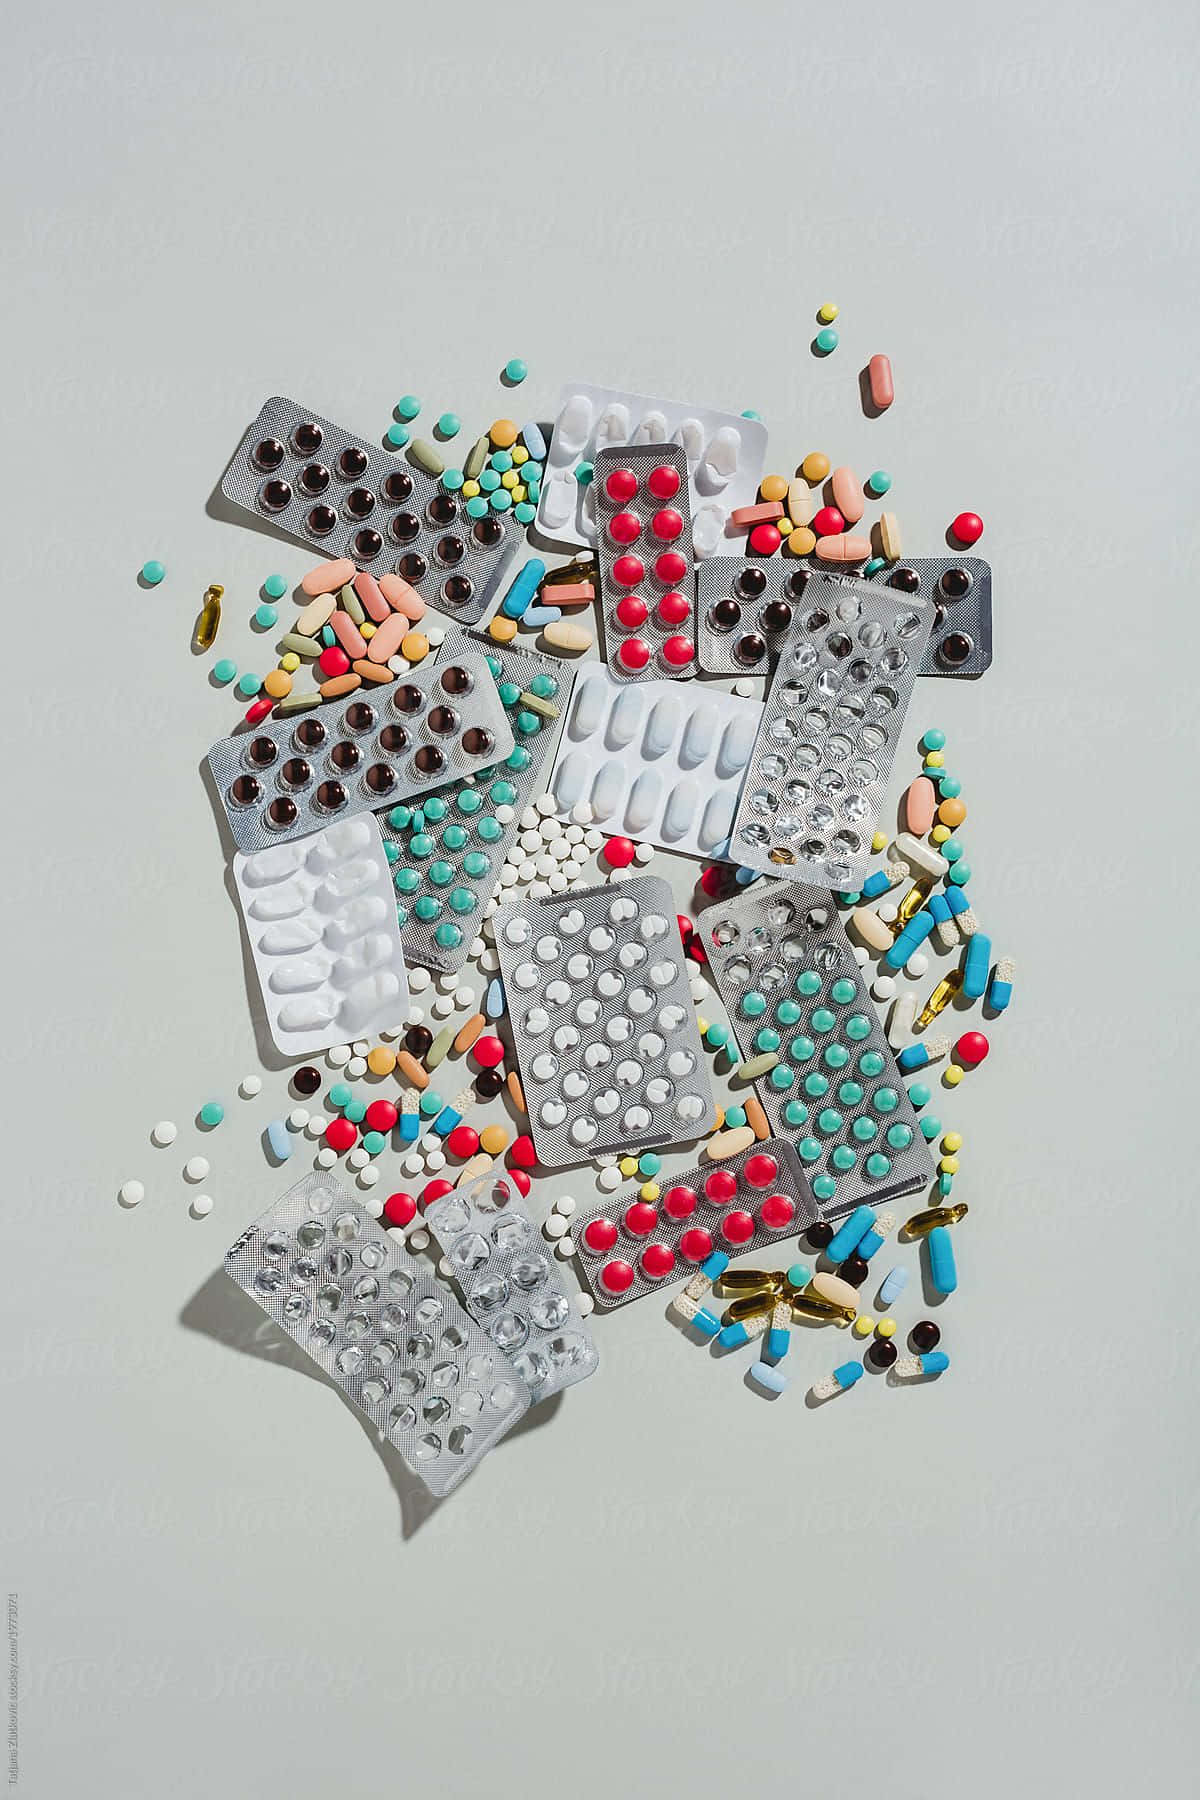 A Pile Of Pills And Tablets On A White Surface